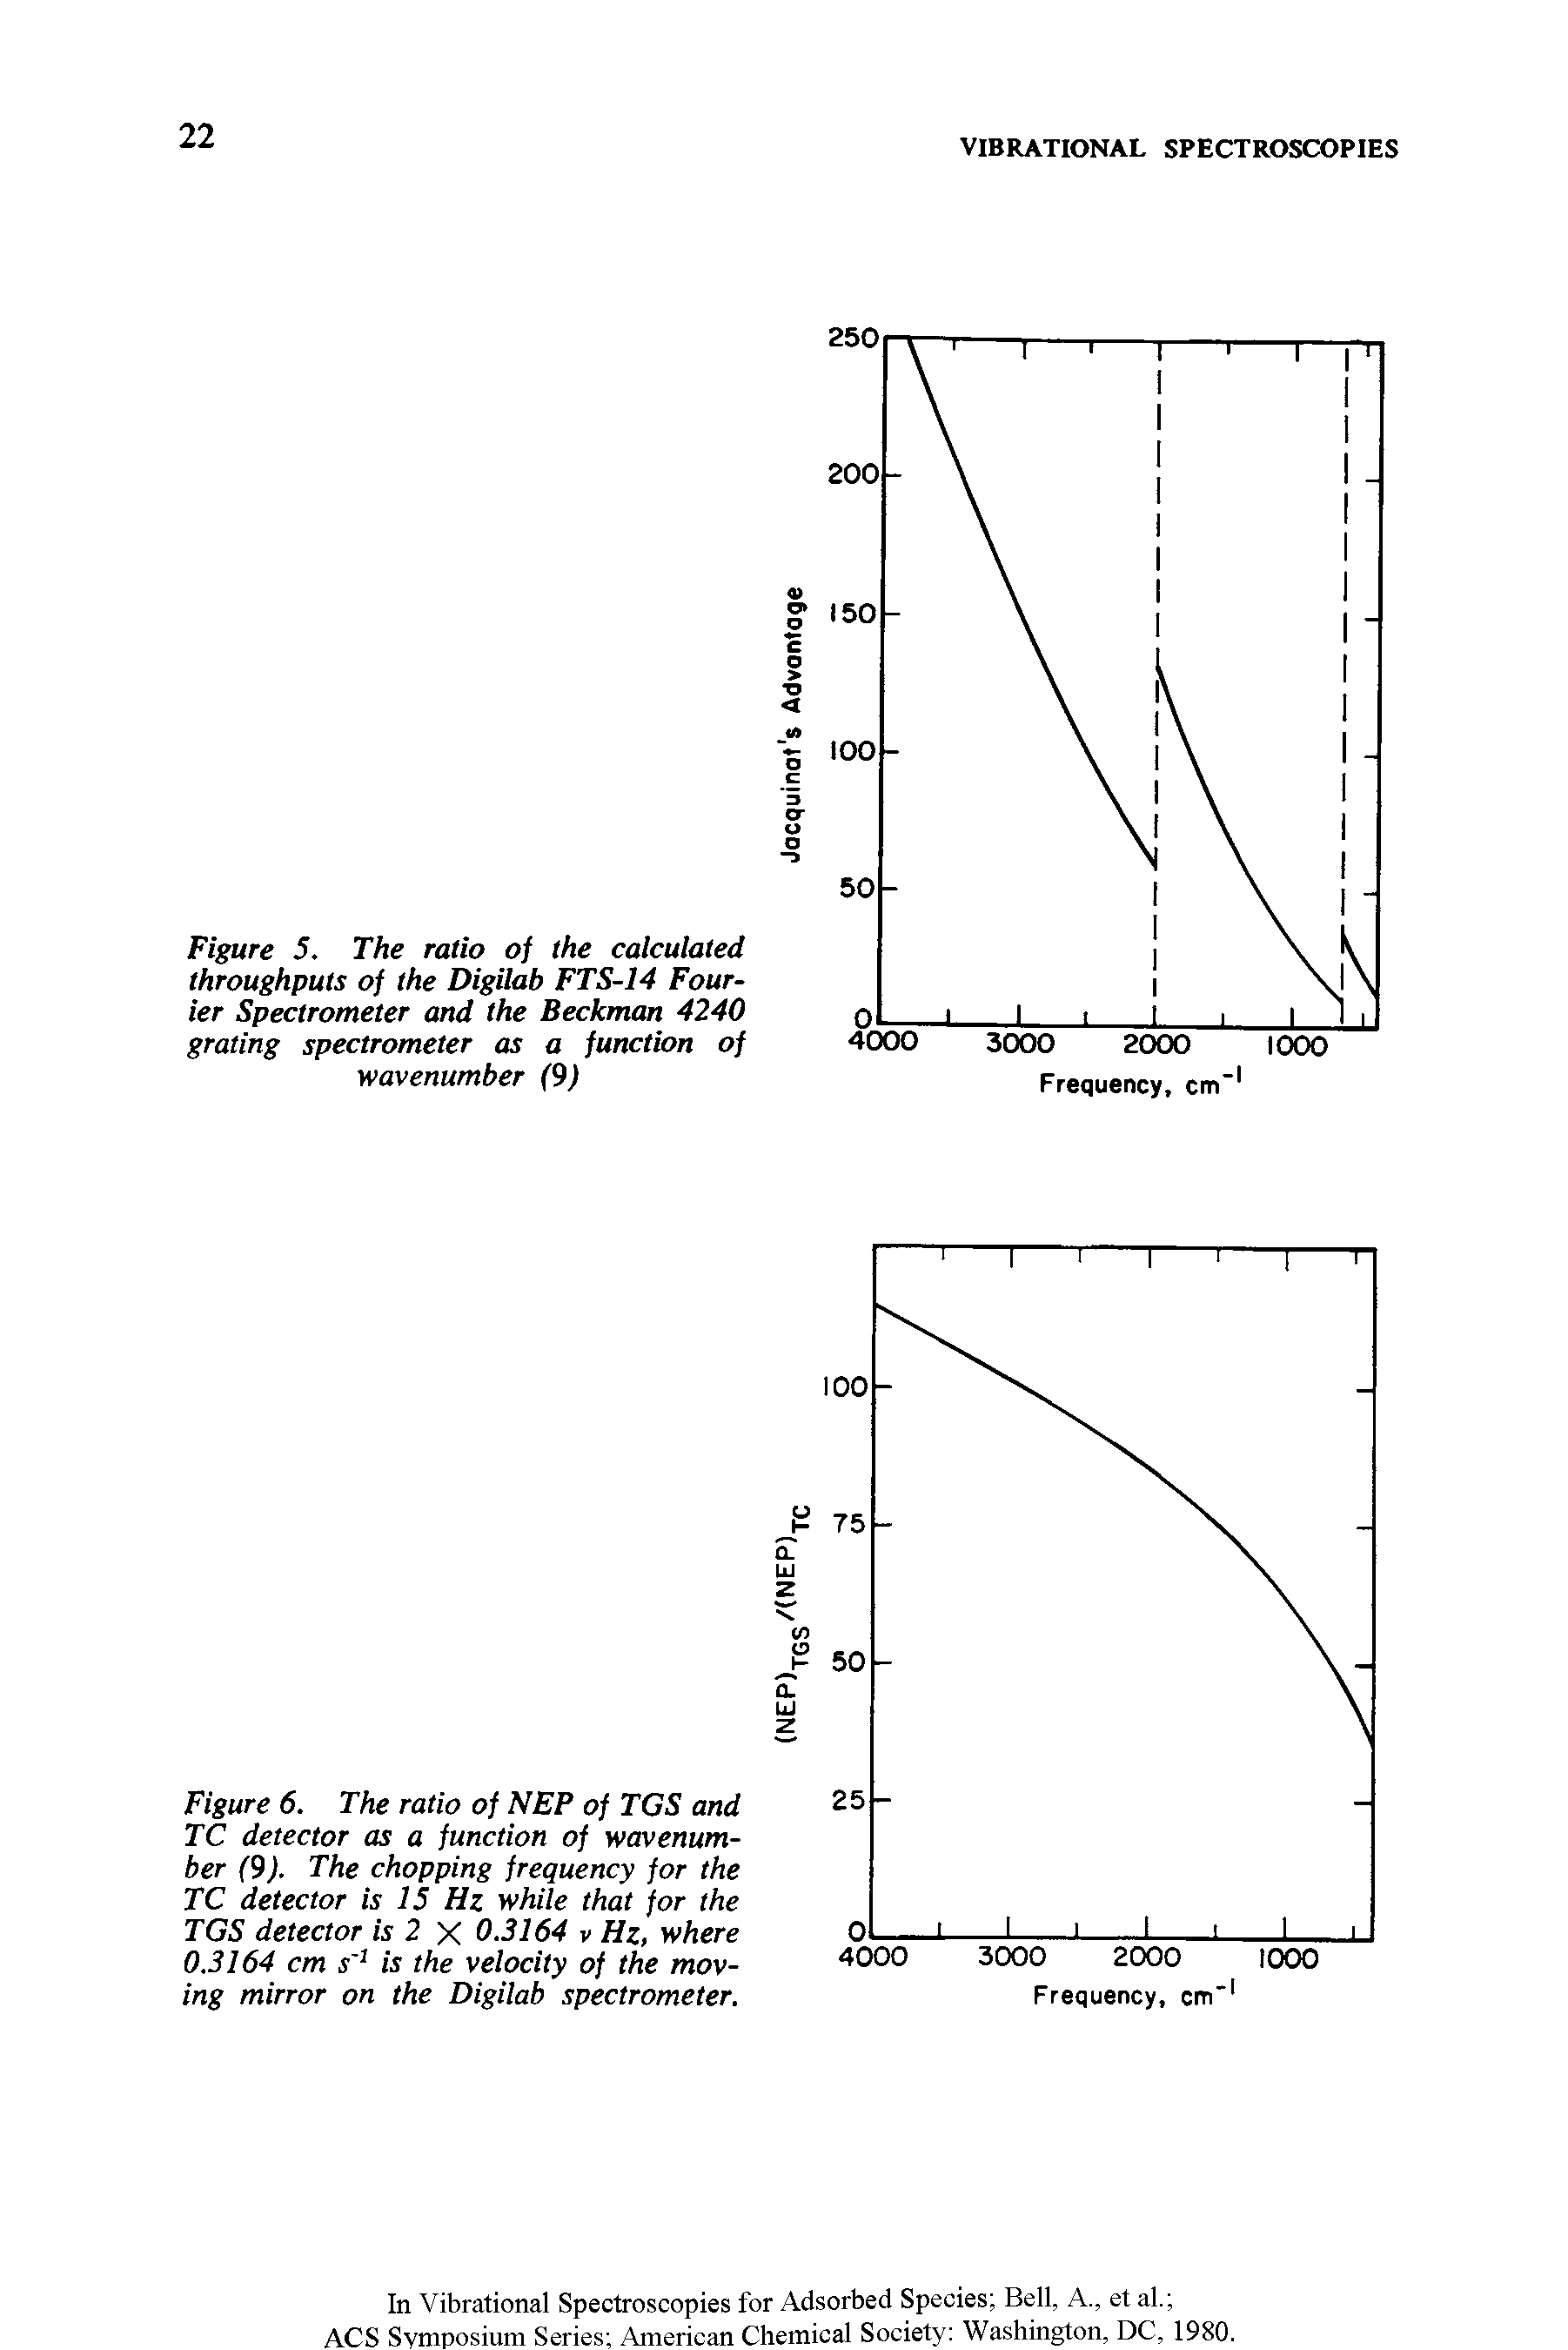 Figure 6. The ratio of NEP of TGS and TC detector as a function of wavenumber (9). The chopping frequency for the TC detector is 15 Hz while that for the TGS detector is 2 X 0.3164 v Hz, where 0.3164 cm s 1 is the velocity of the moving mirror on the Digilab spectrometer.